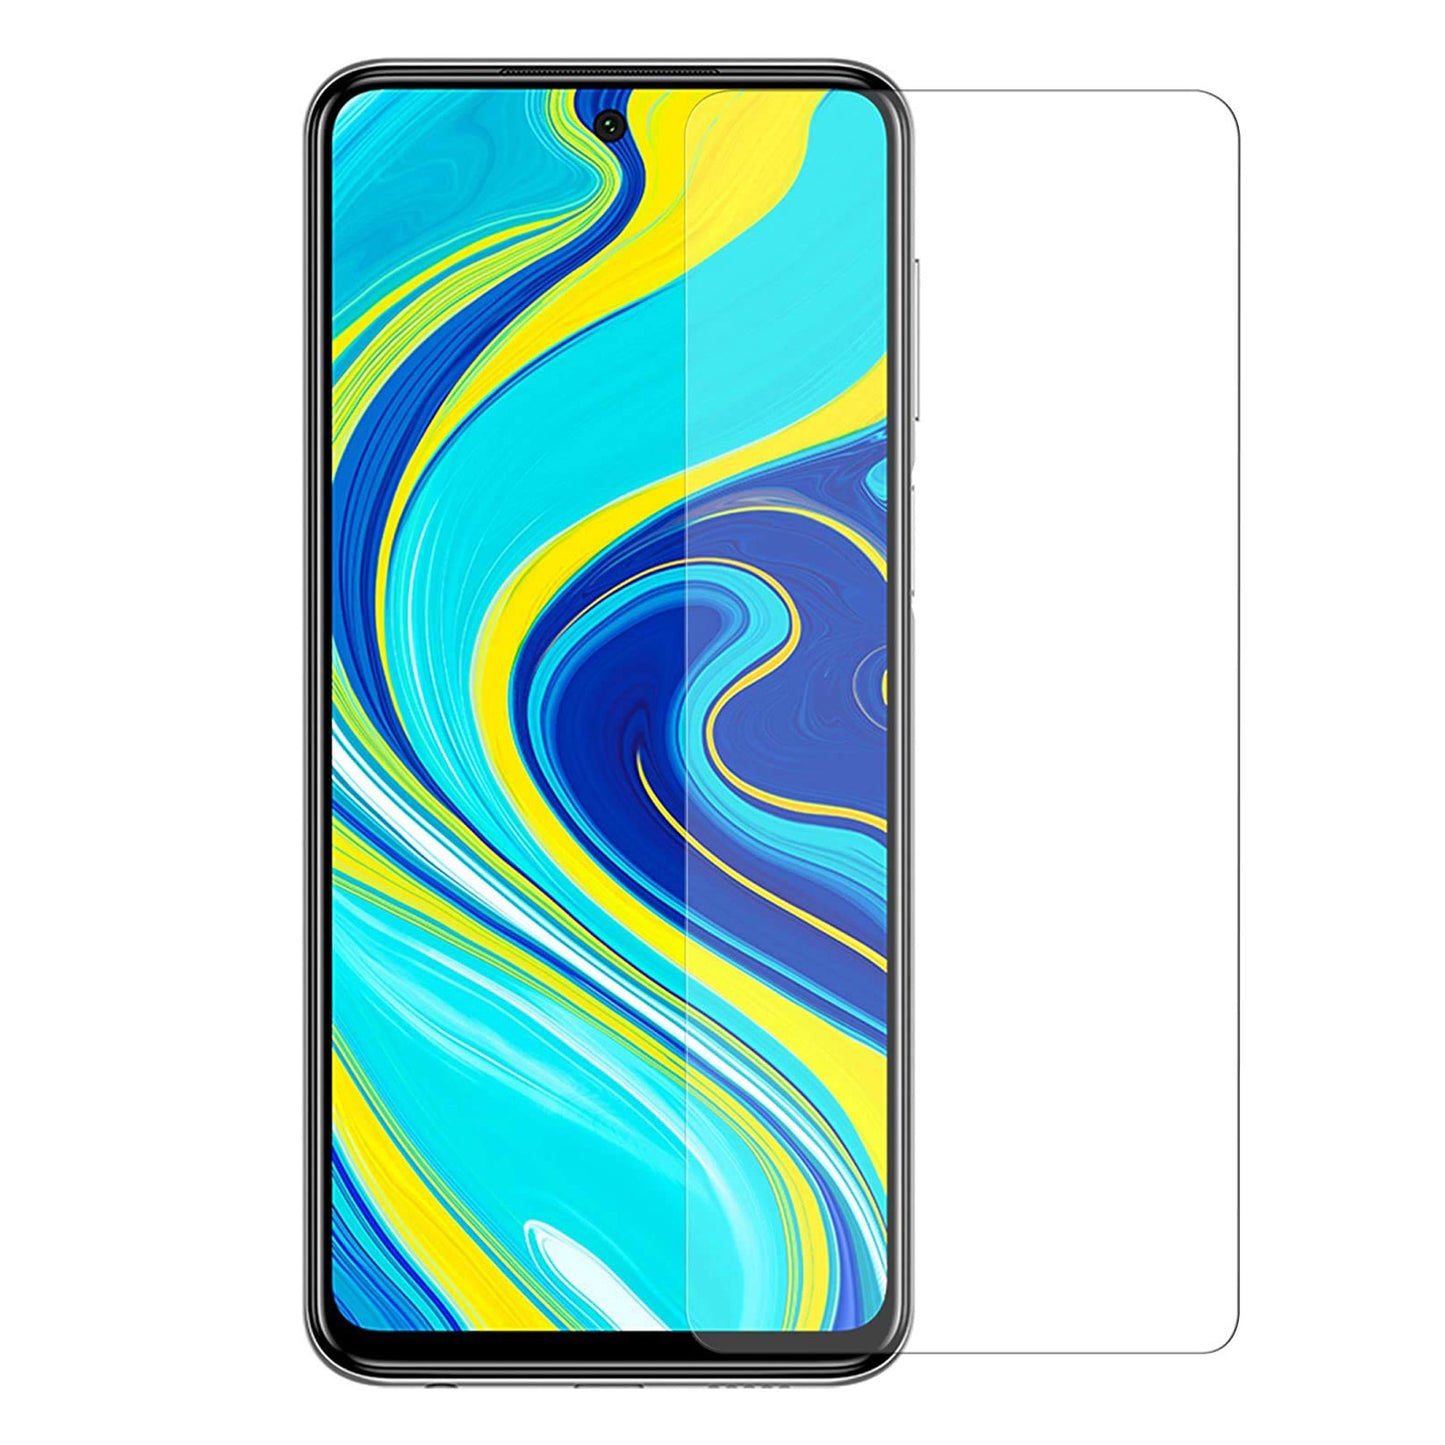 [2 Pack] MEZON Xiaomi Redmi Note 9 Pro Tempered Glass 9H HD Crystal Clear Premium Case Friendly Screen Protector